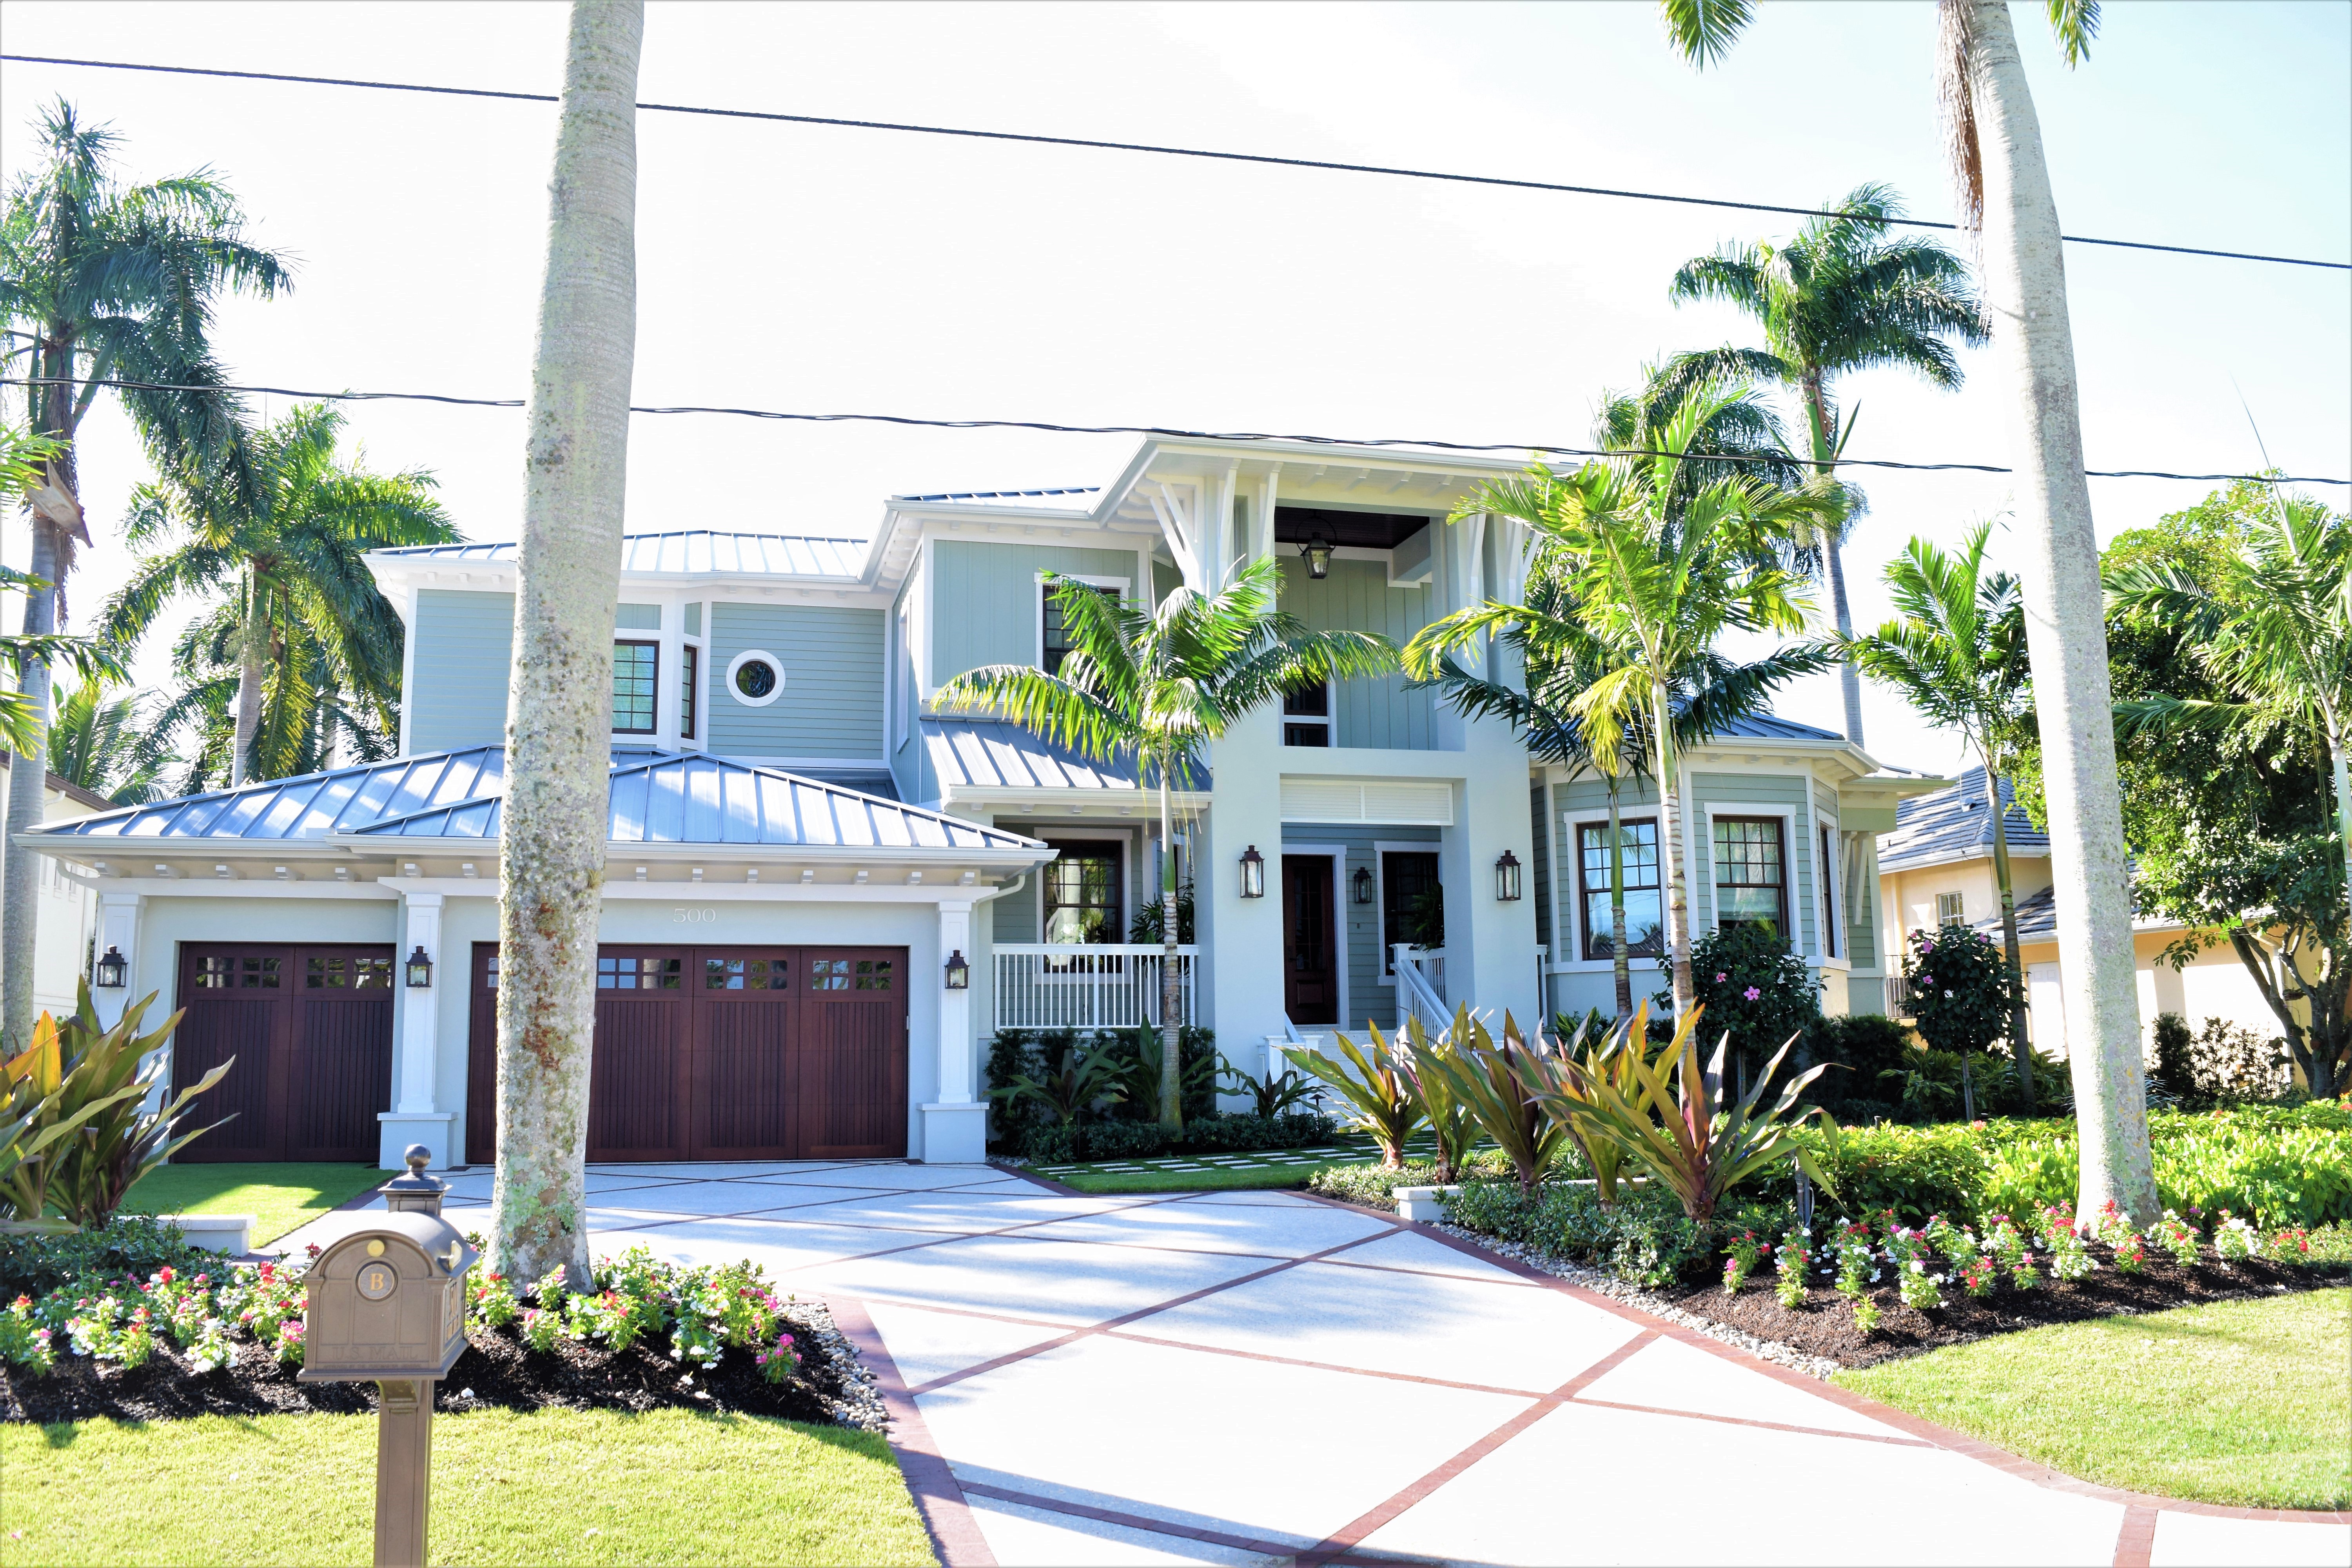 Residential Property Management in and near Naples Florida